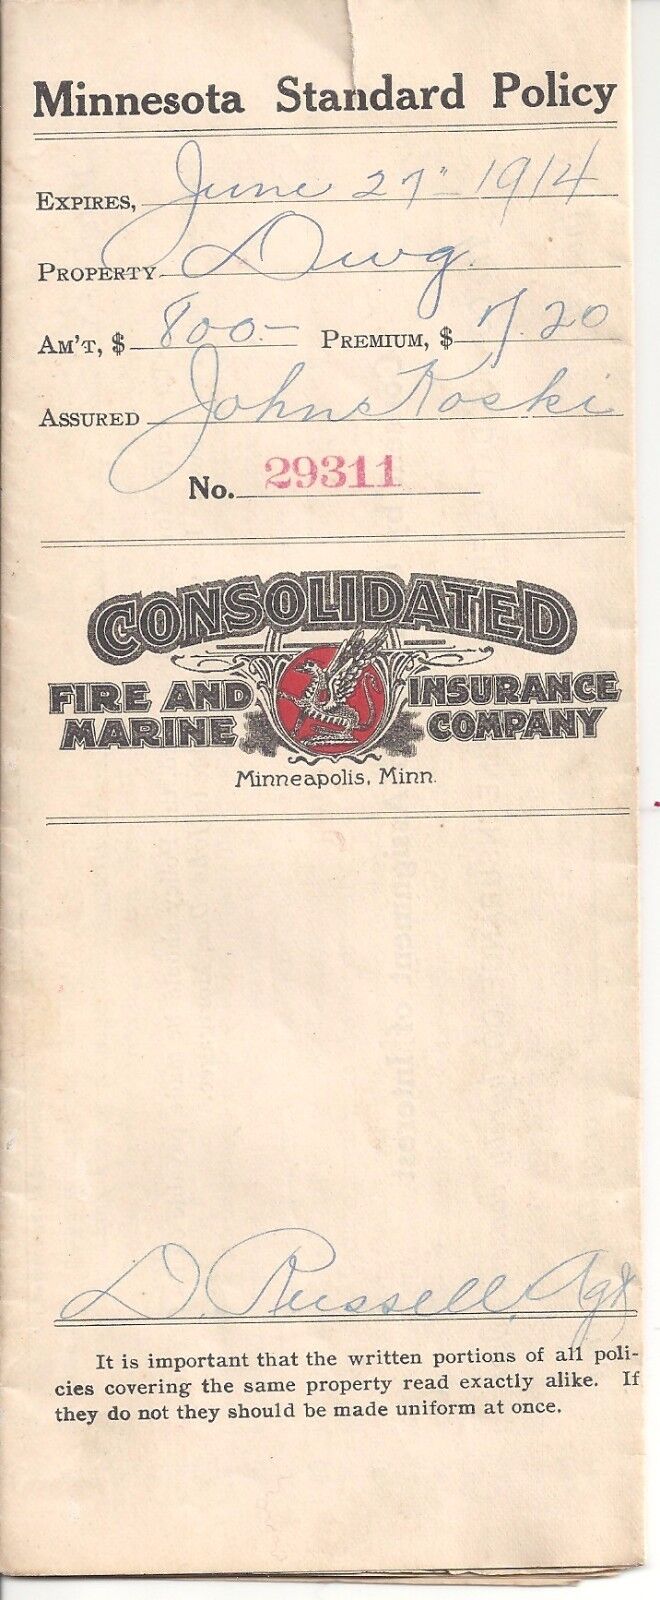 Minnesota Standard Policy by Consolidated 1914